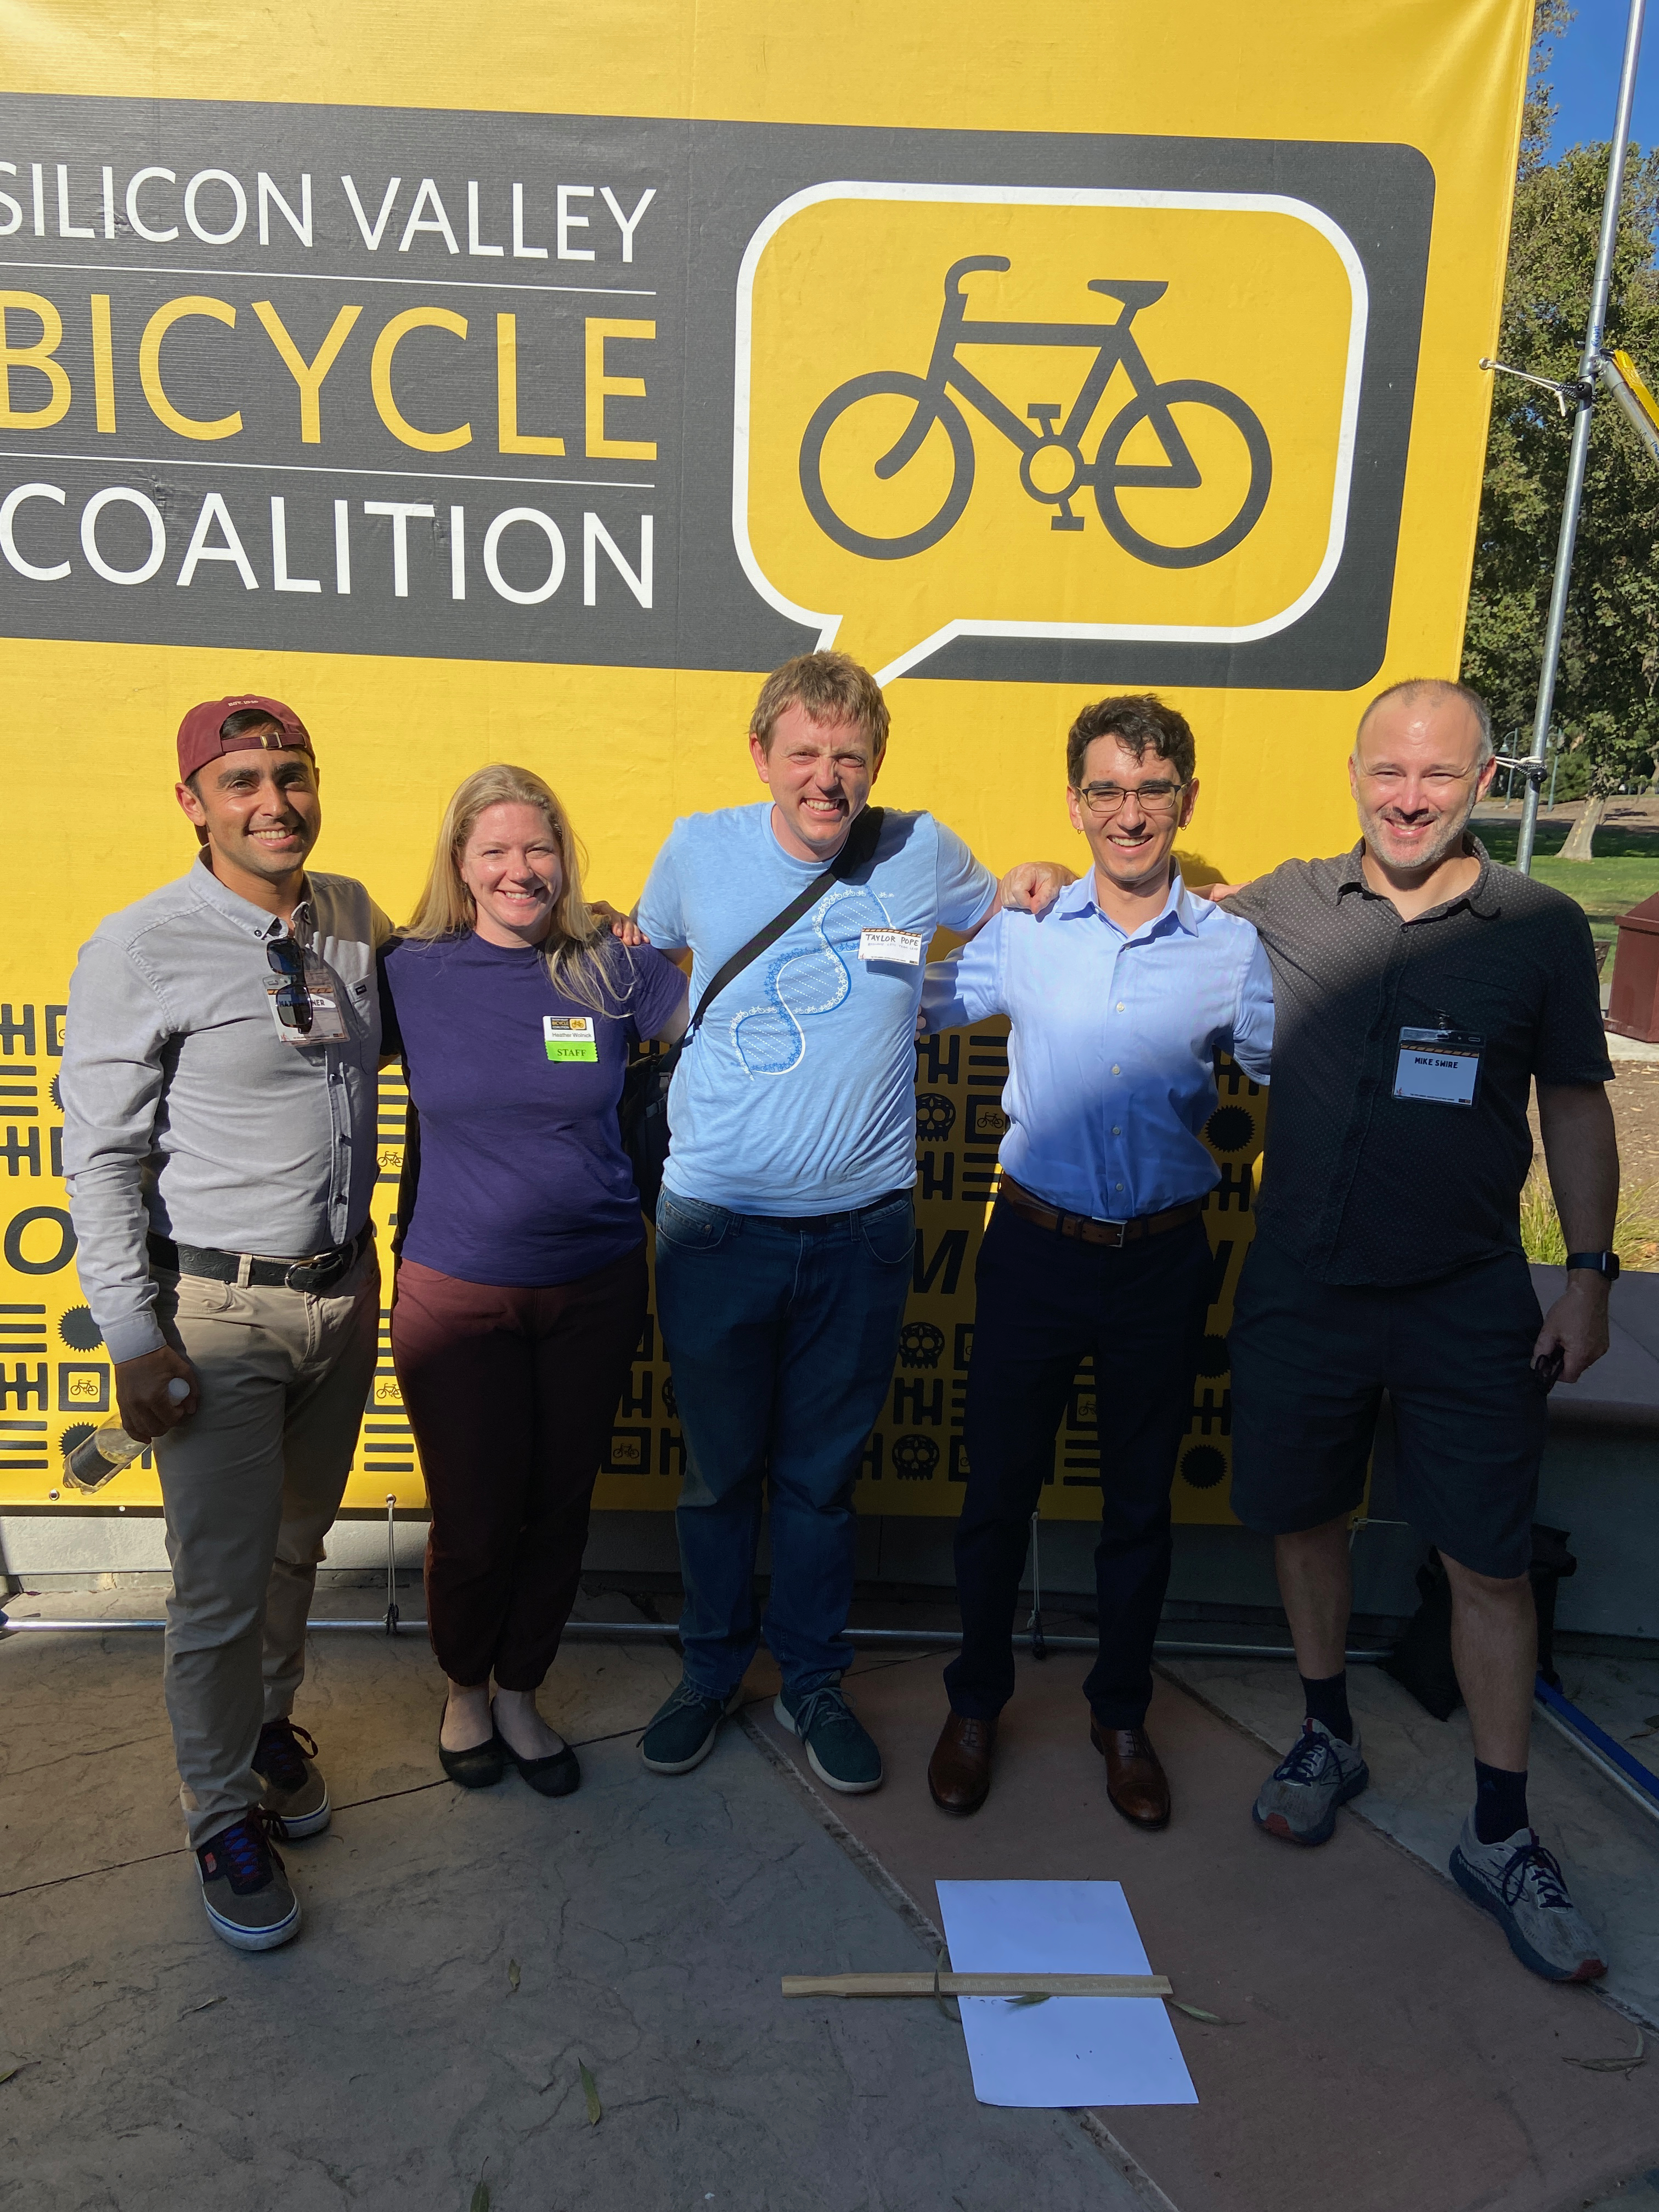 Bicycling advocates from San Mateo and Redwood City